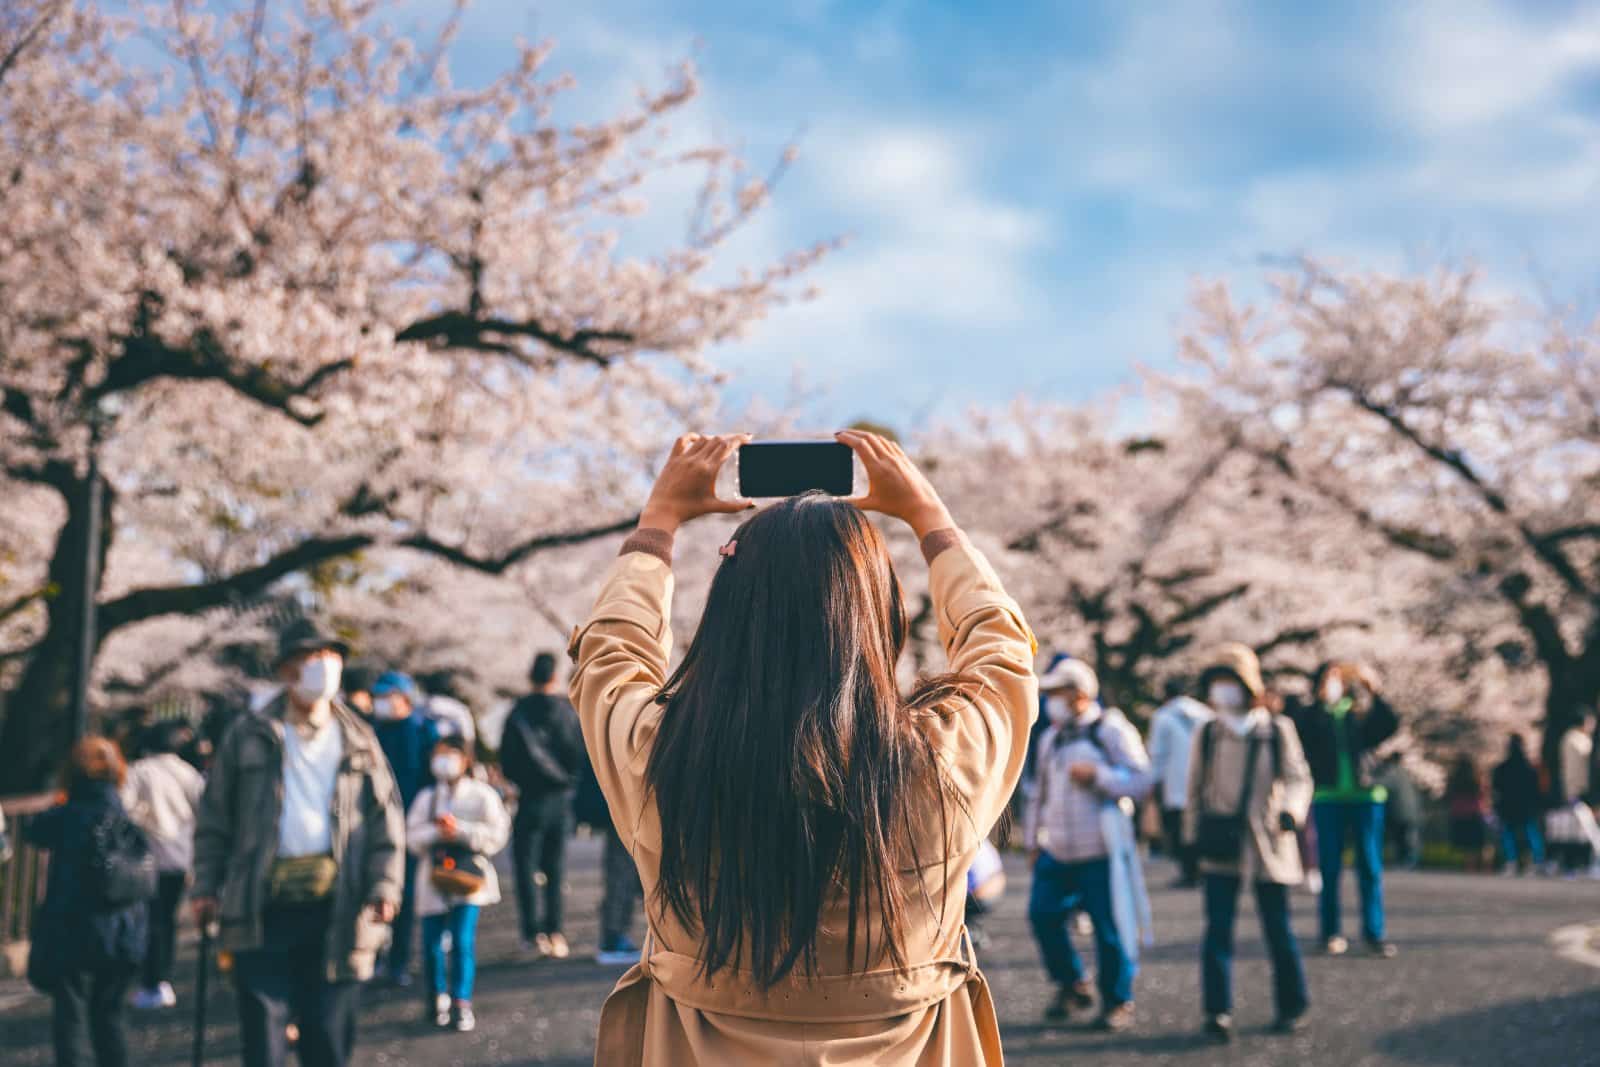 <p class="wp-caption-text">Image Credit: Shutterstock / Peera_stockfoto</p>  <p>Why pay to enter when a selfie outside is free? Your followers won’t know the difference. If they complain, remind them they’re following you for your sparkling personality, not your travel budget.</p>